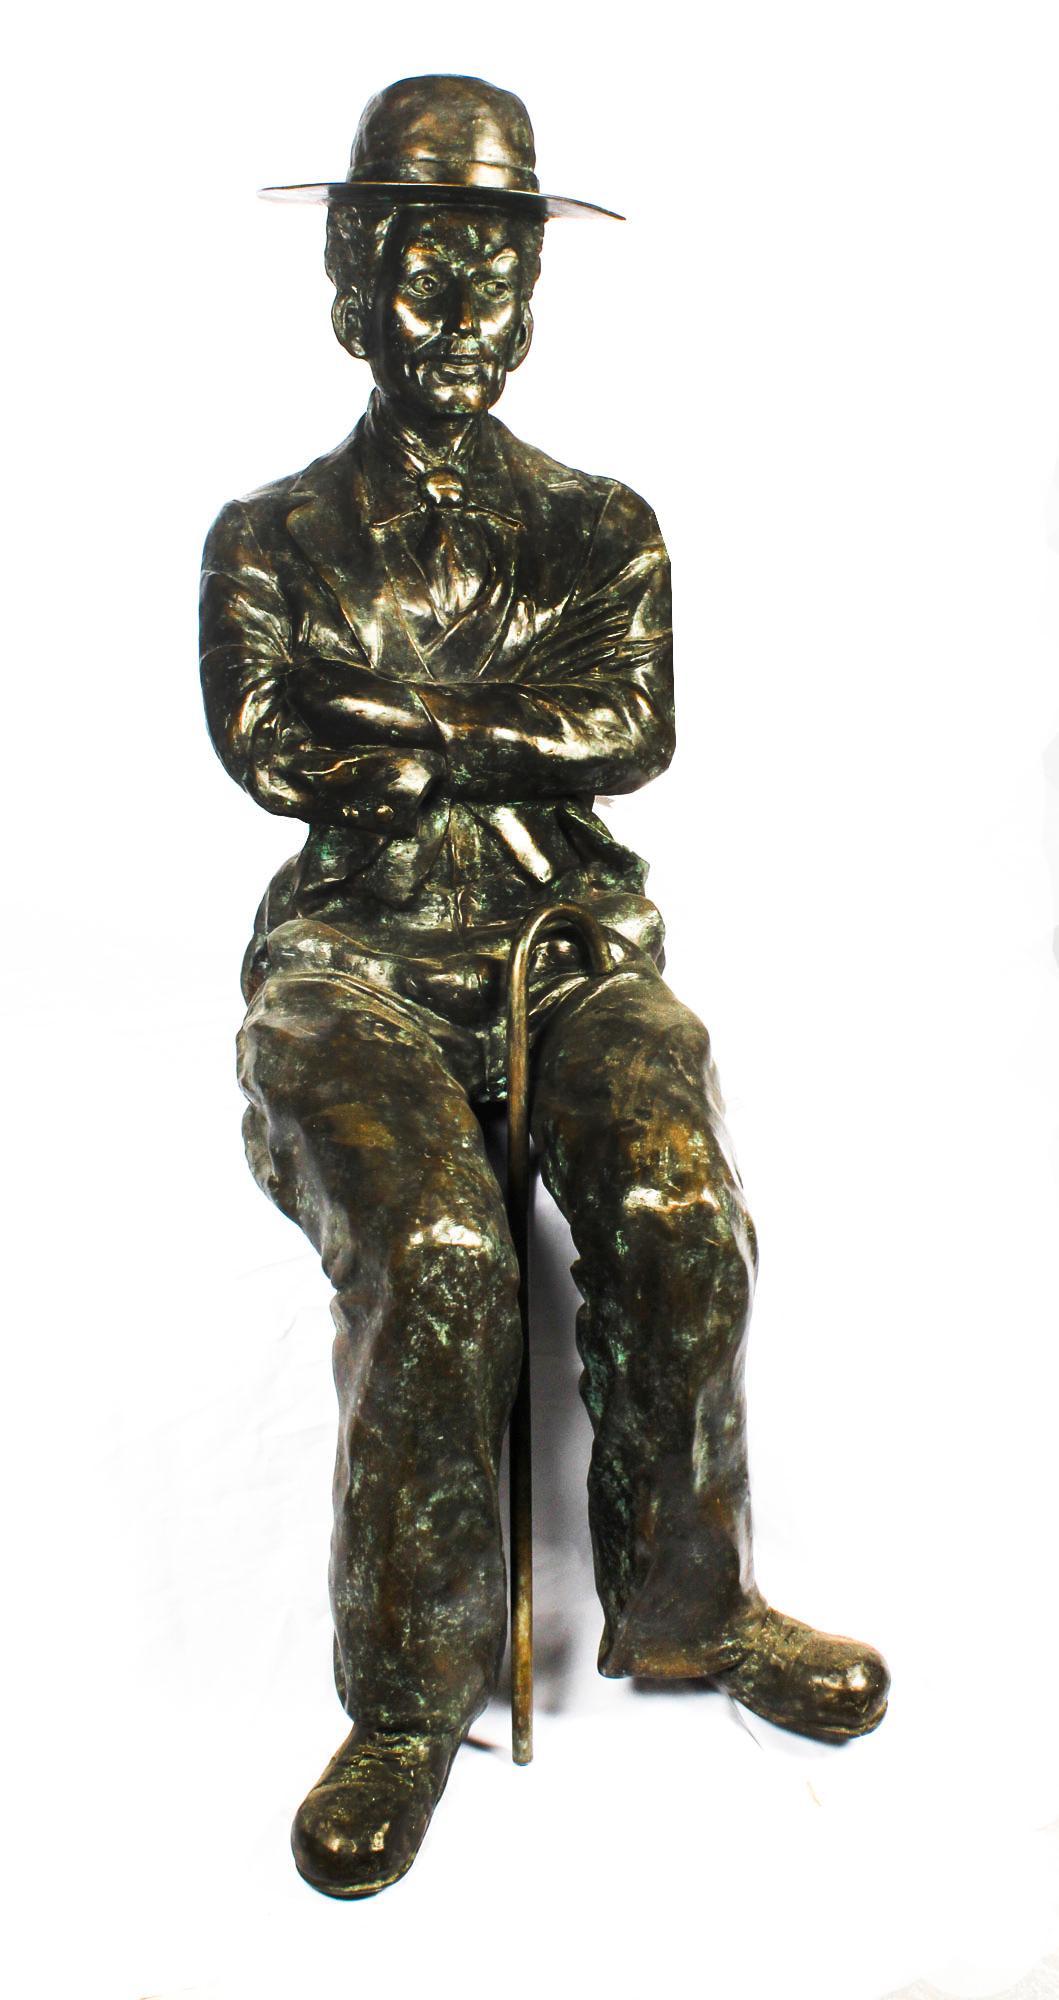 Vintage Lifesize Bronze Sculpture of Seated Charlie Chaplin 20th Century In Good Condition For Sale In London, GB